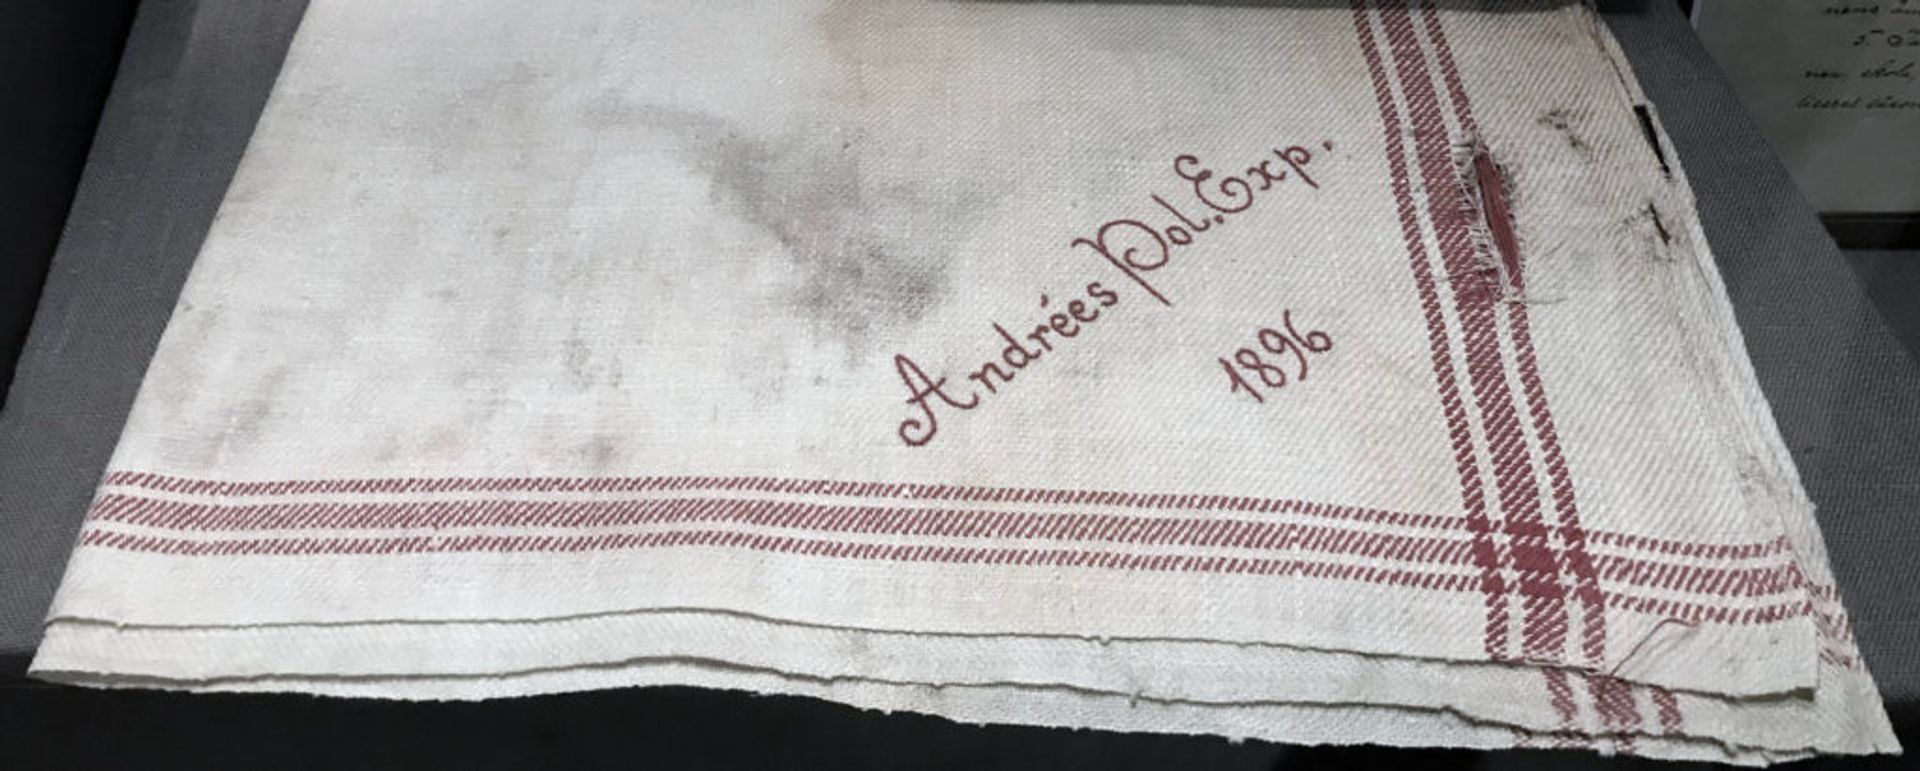 Tea towel, an artefact from the expedition